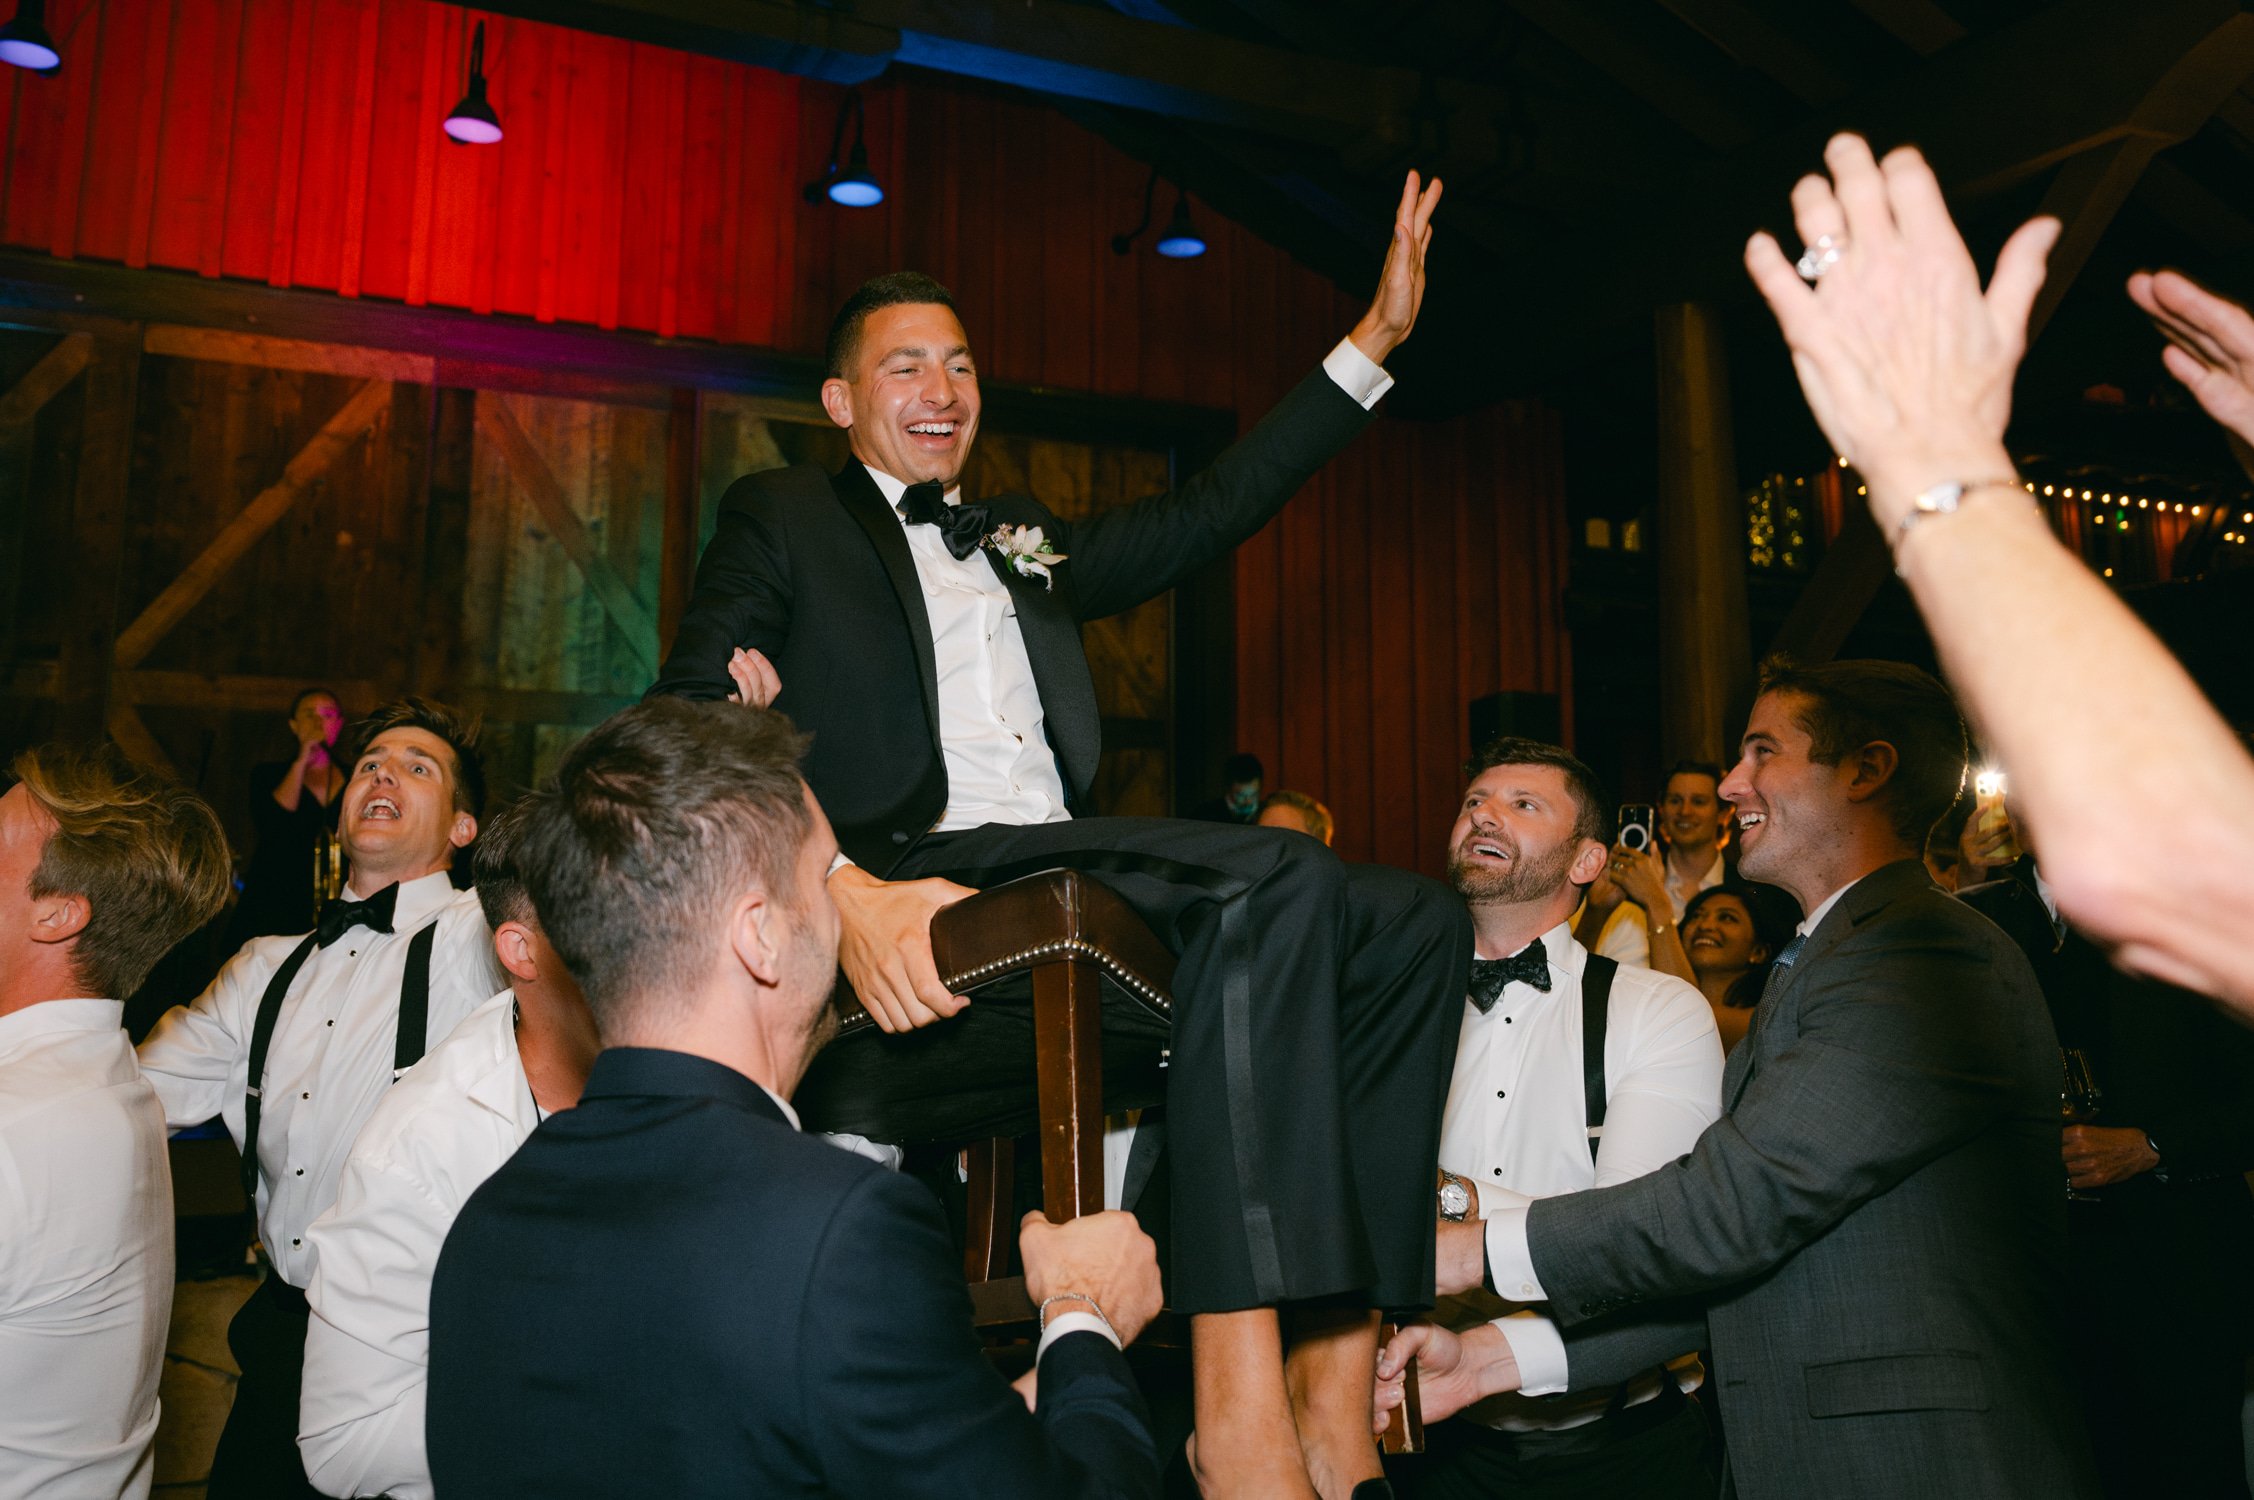 Martis Camp Wedding, photo of the groom being carried during the afterparty